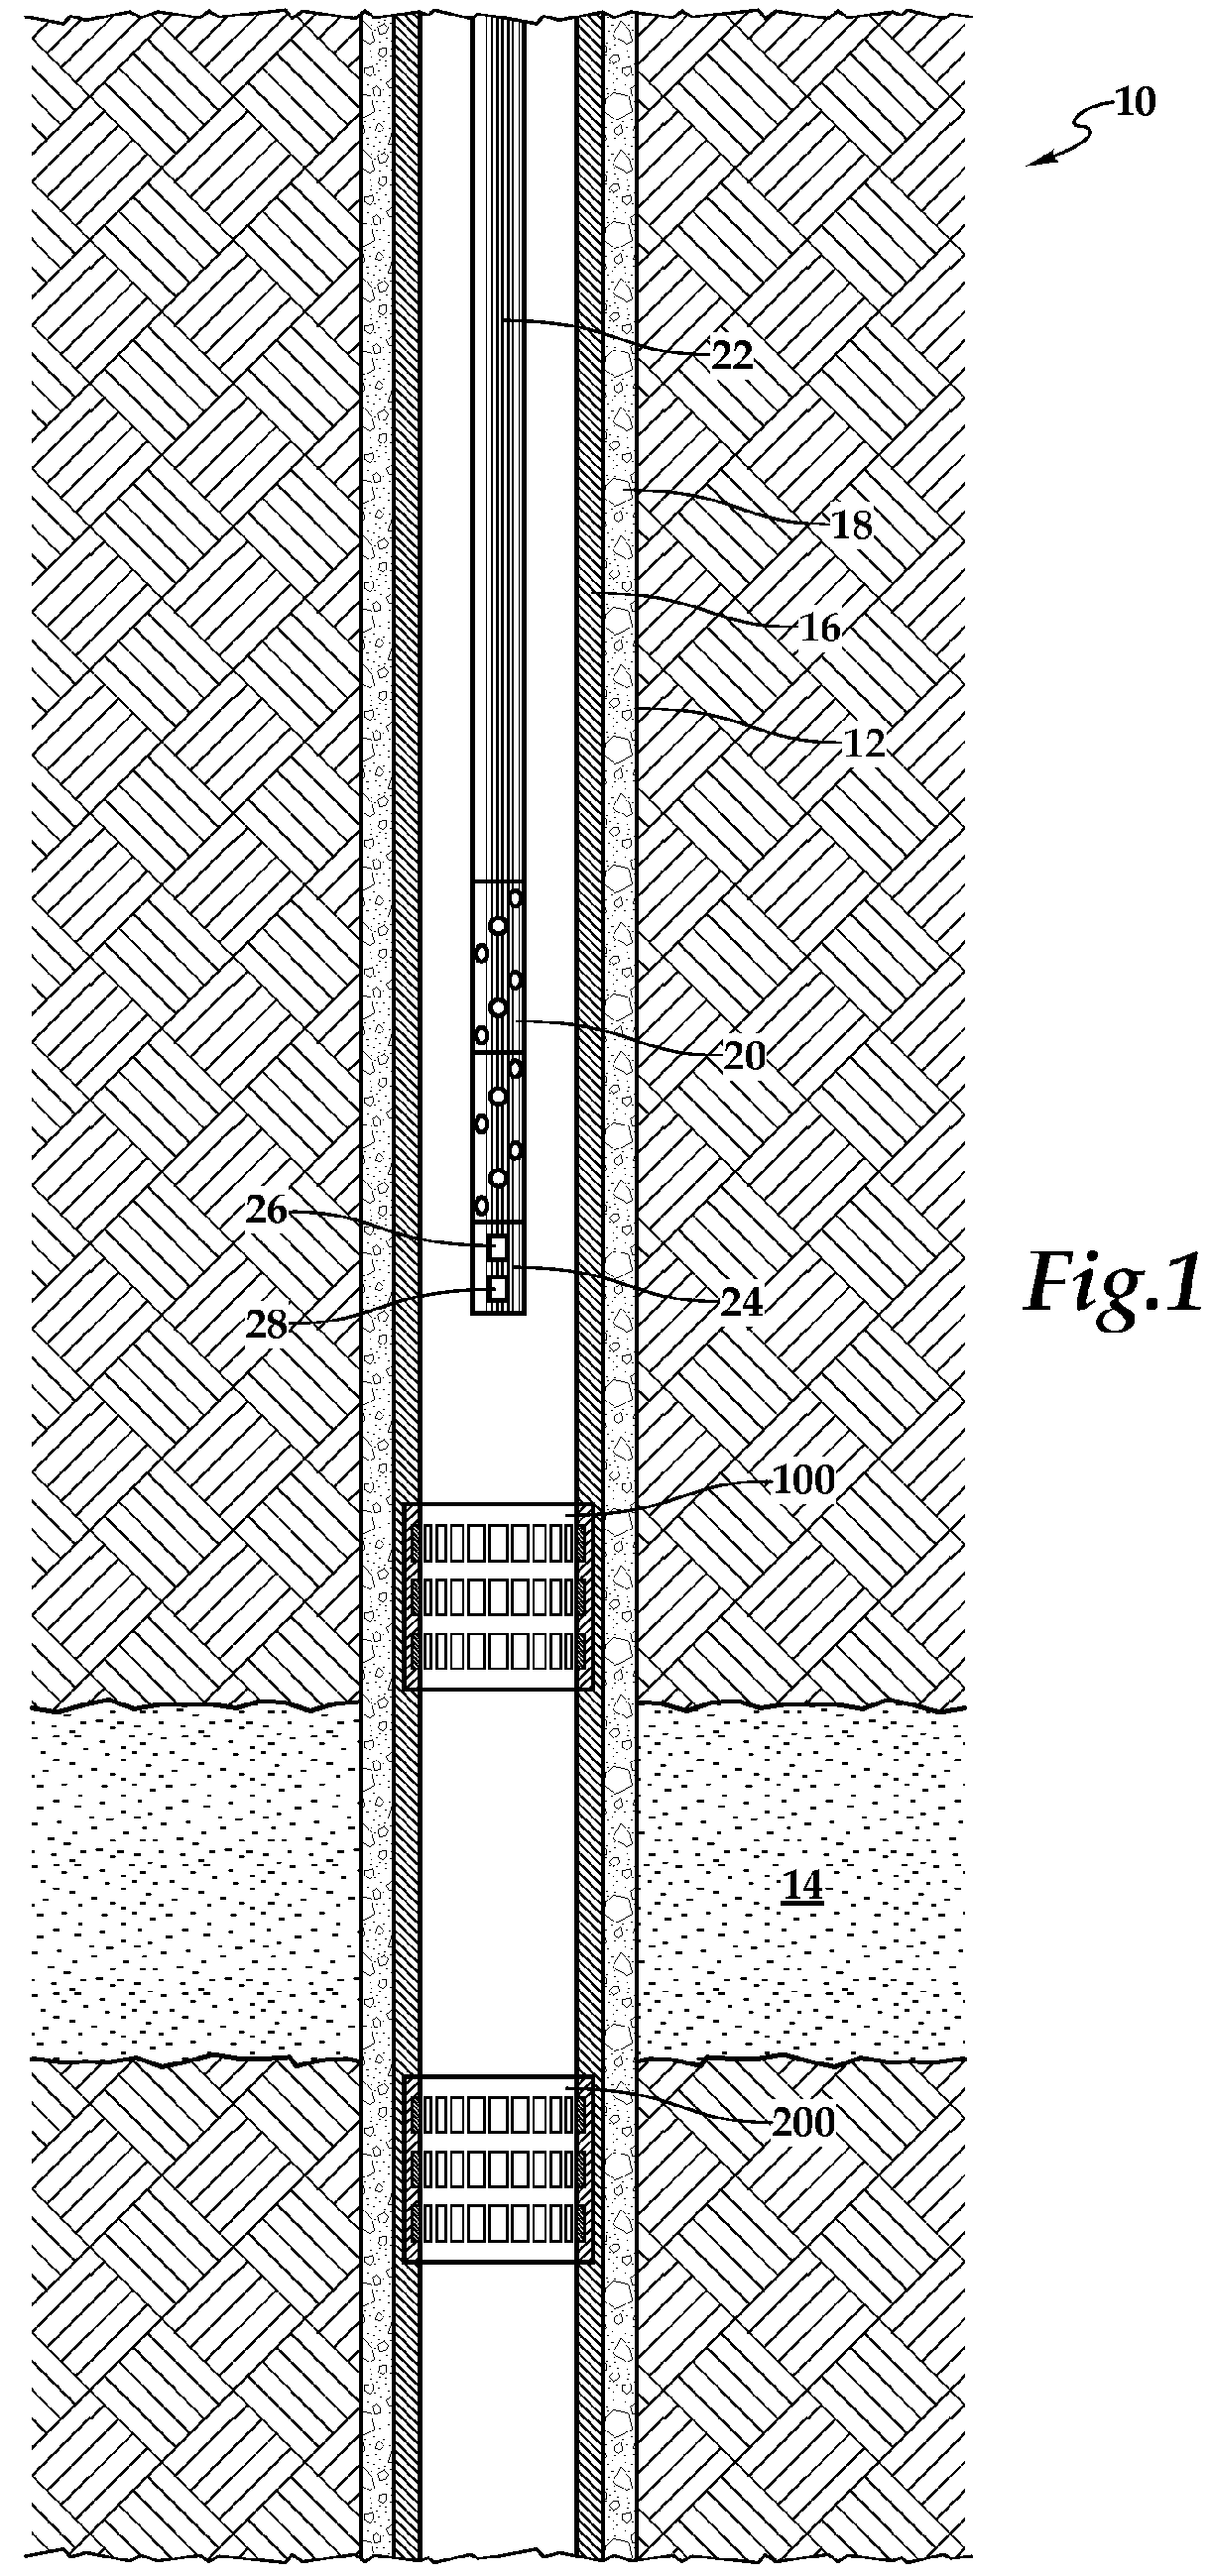 Magnetic Location Determination in a Wellbore